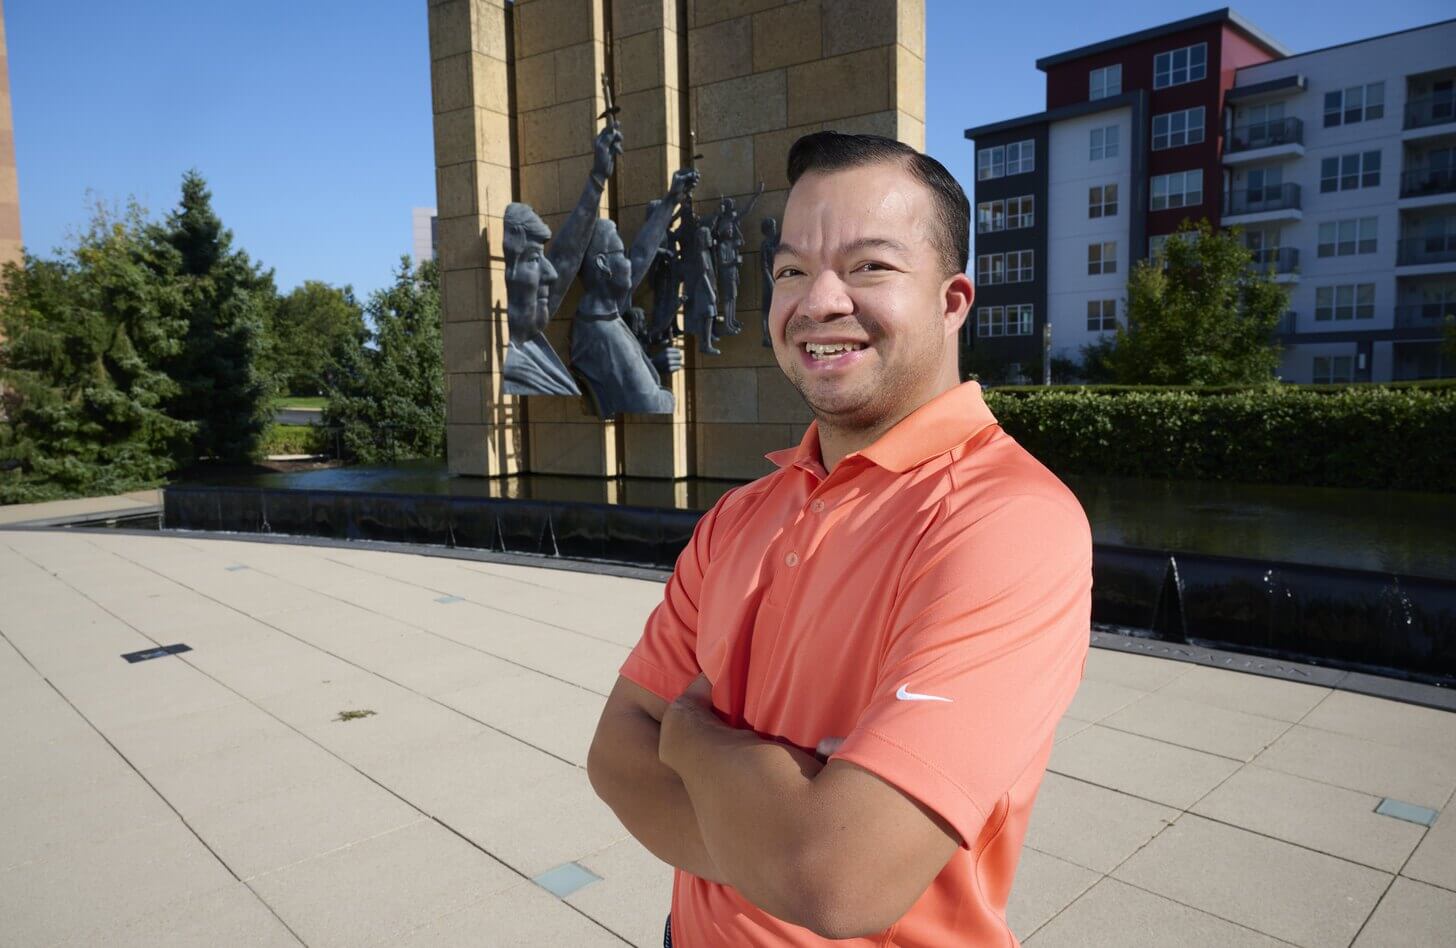 Joe, a Mid-America Transplant employee, stands in front of the donor memorial sculpture fountain, and is wearing an orange-pink Nike polo